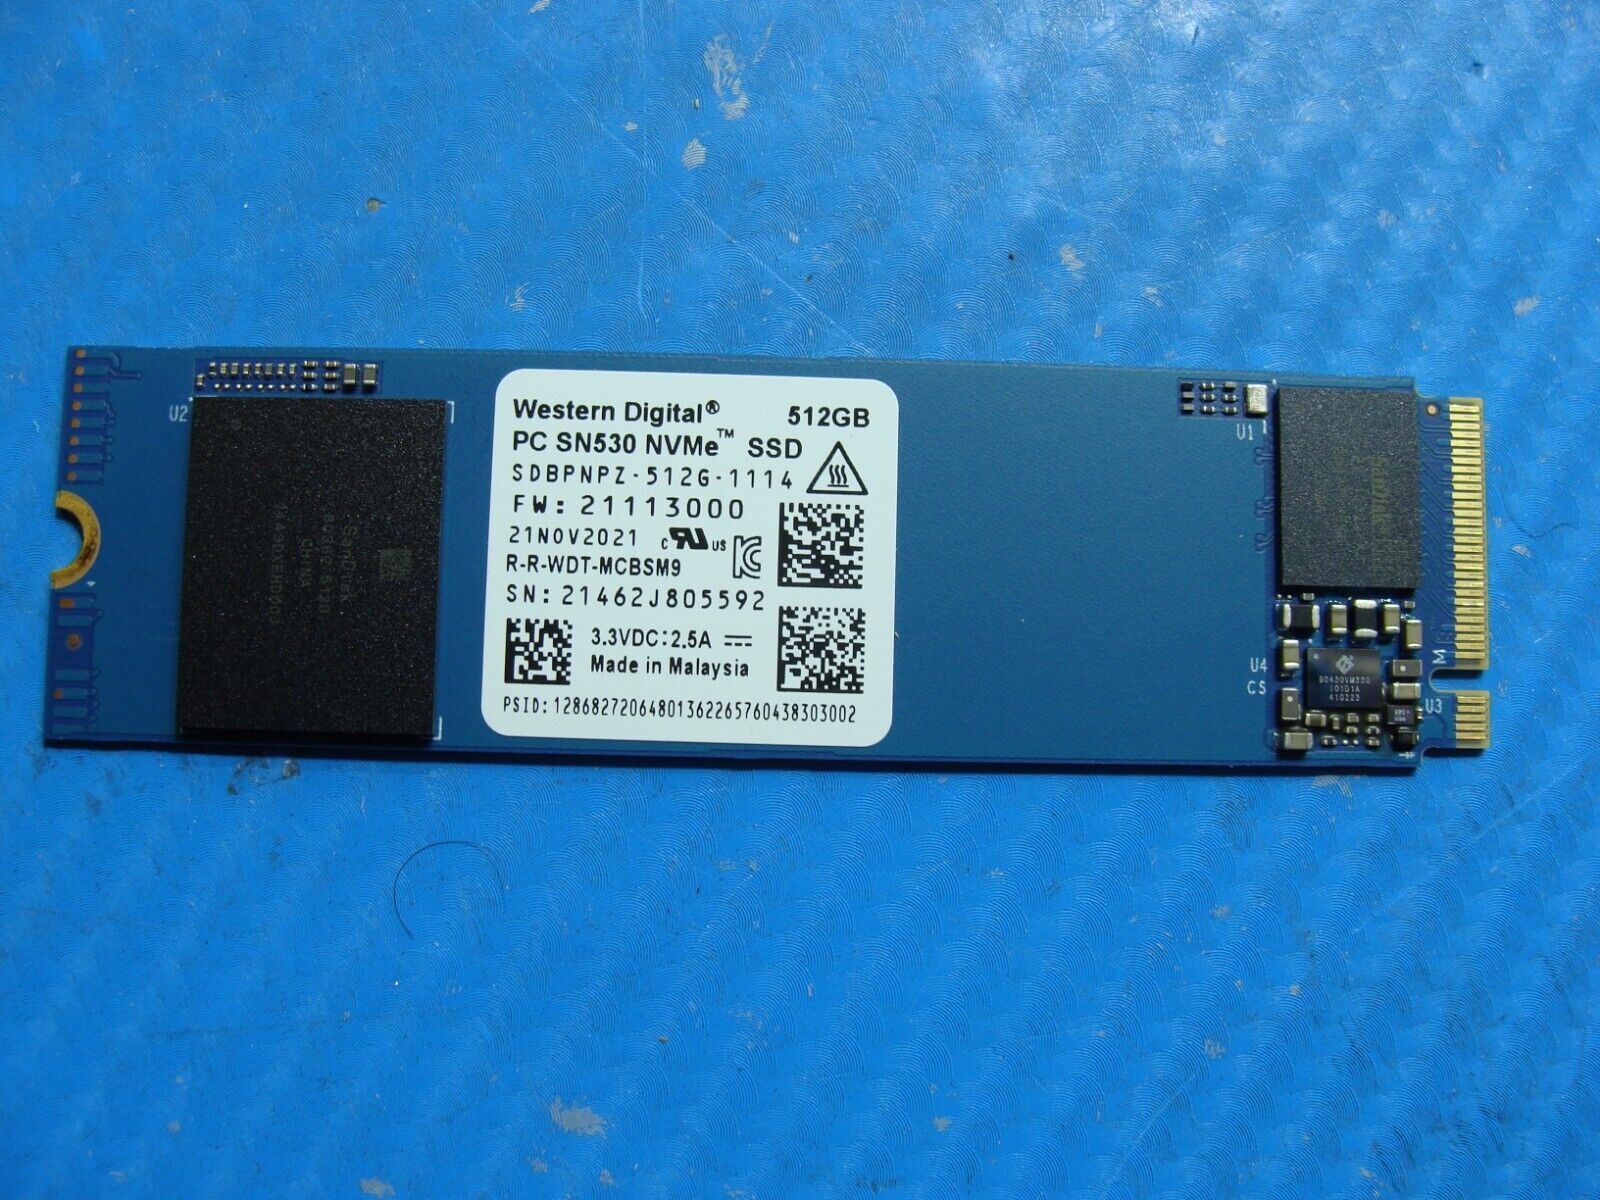 Acer SFX14-41G-R1S6 WD M.2 NVMe 512GB SSD Solid State Drive SDBPNPZ-512G-1114